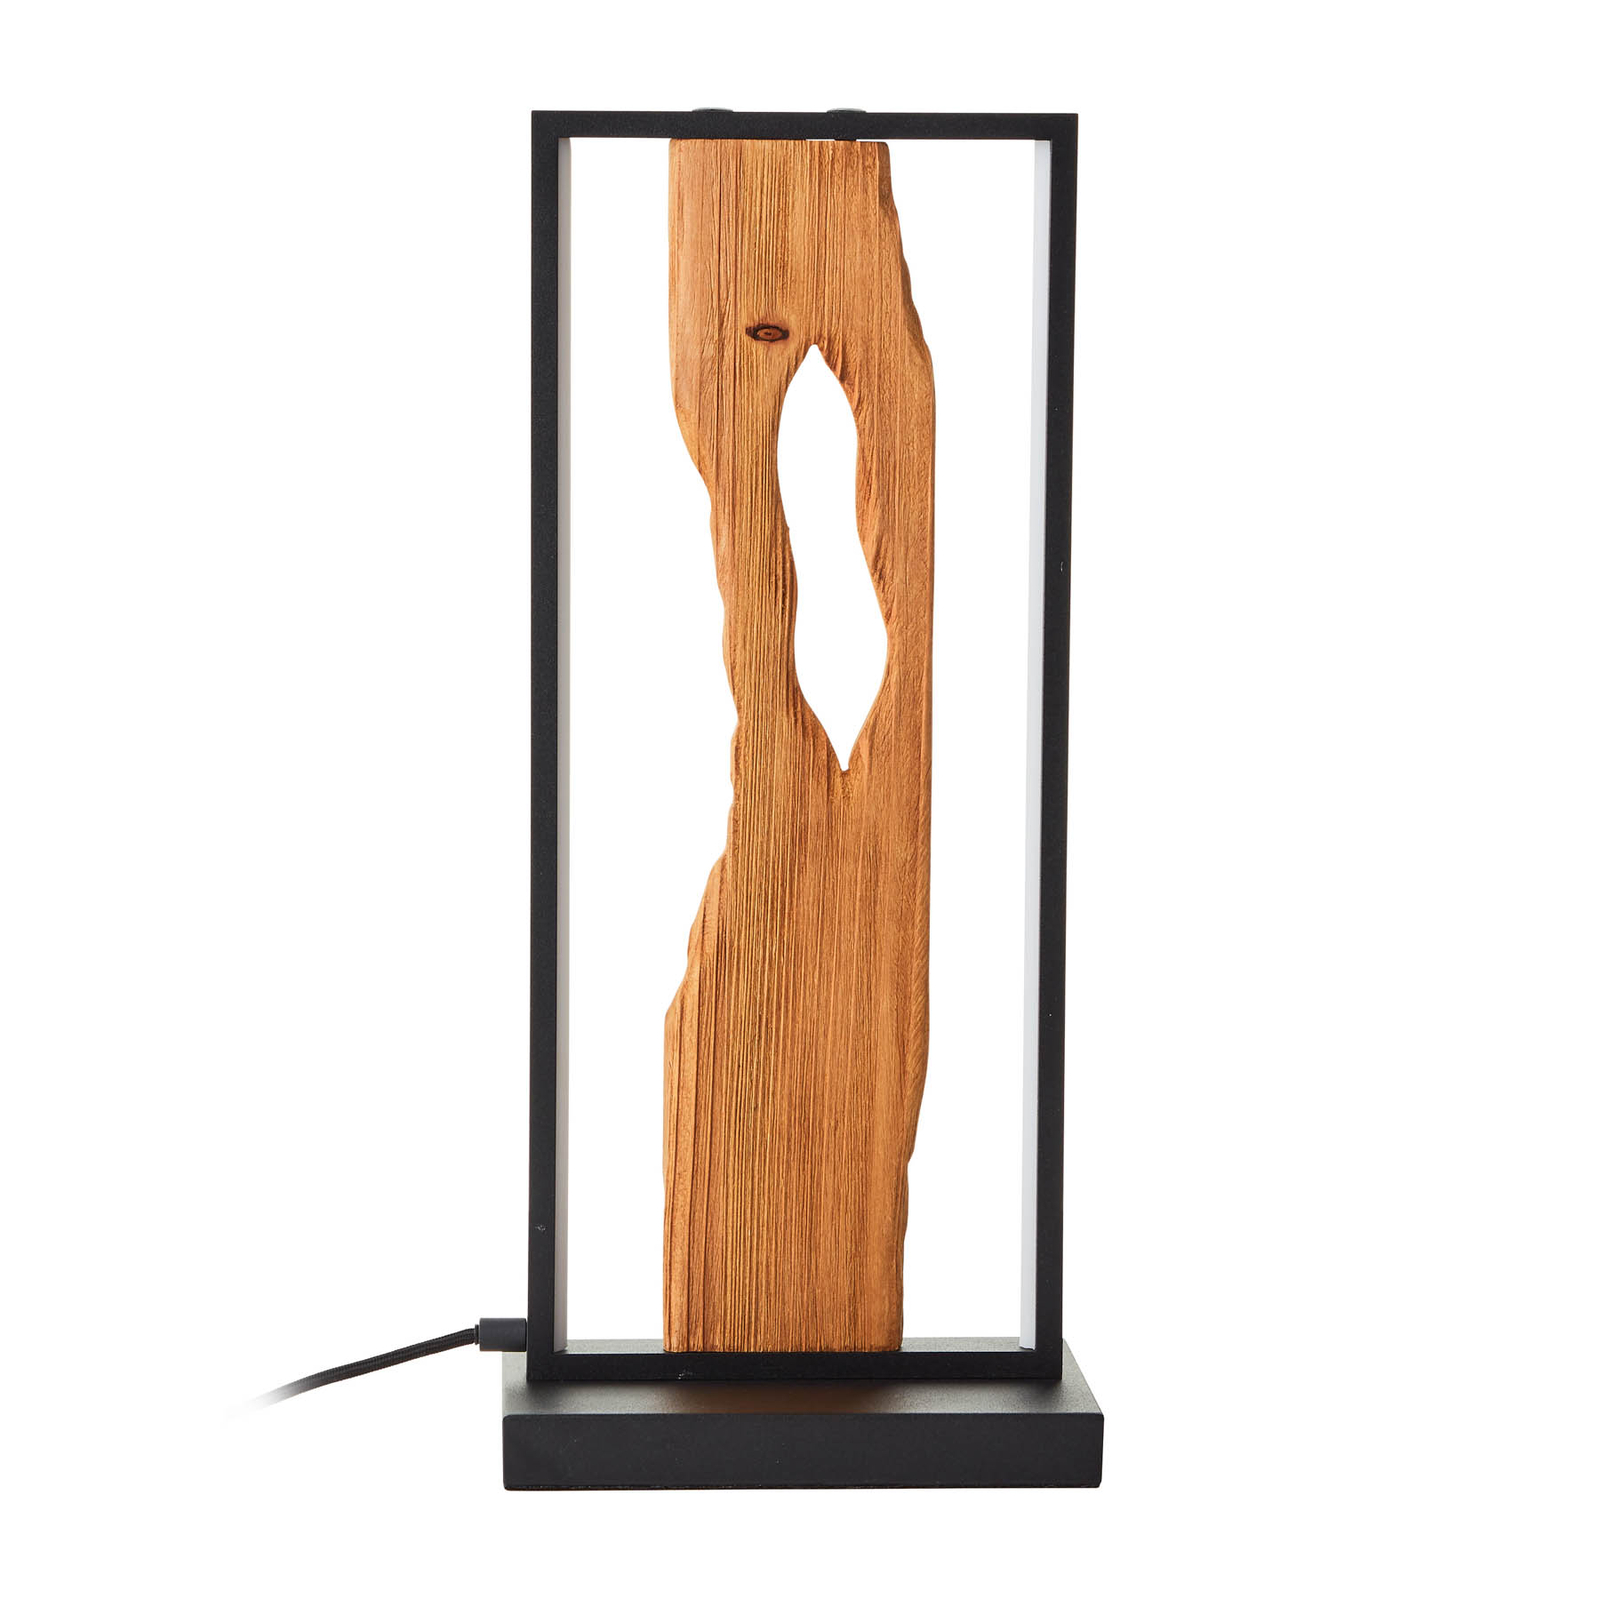 Chaumont LED table lamp made of wood